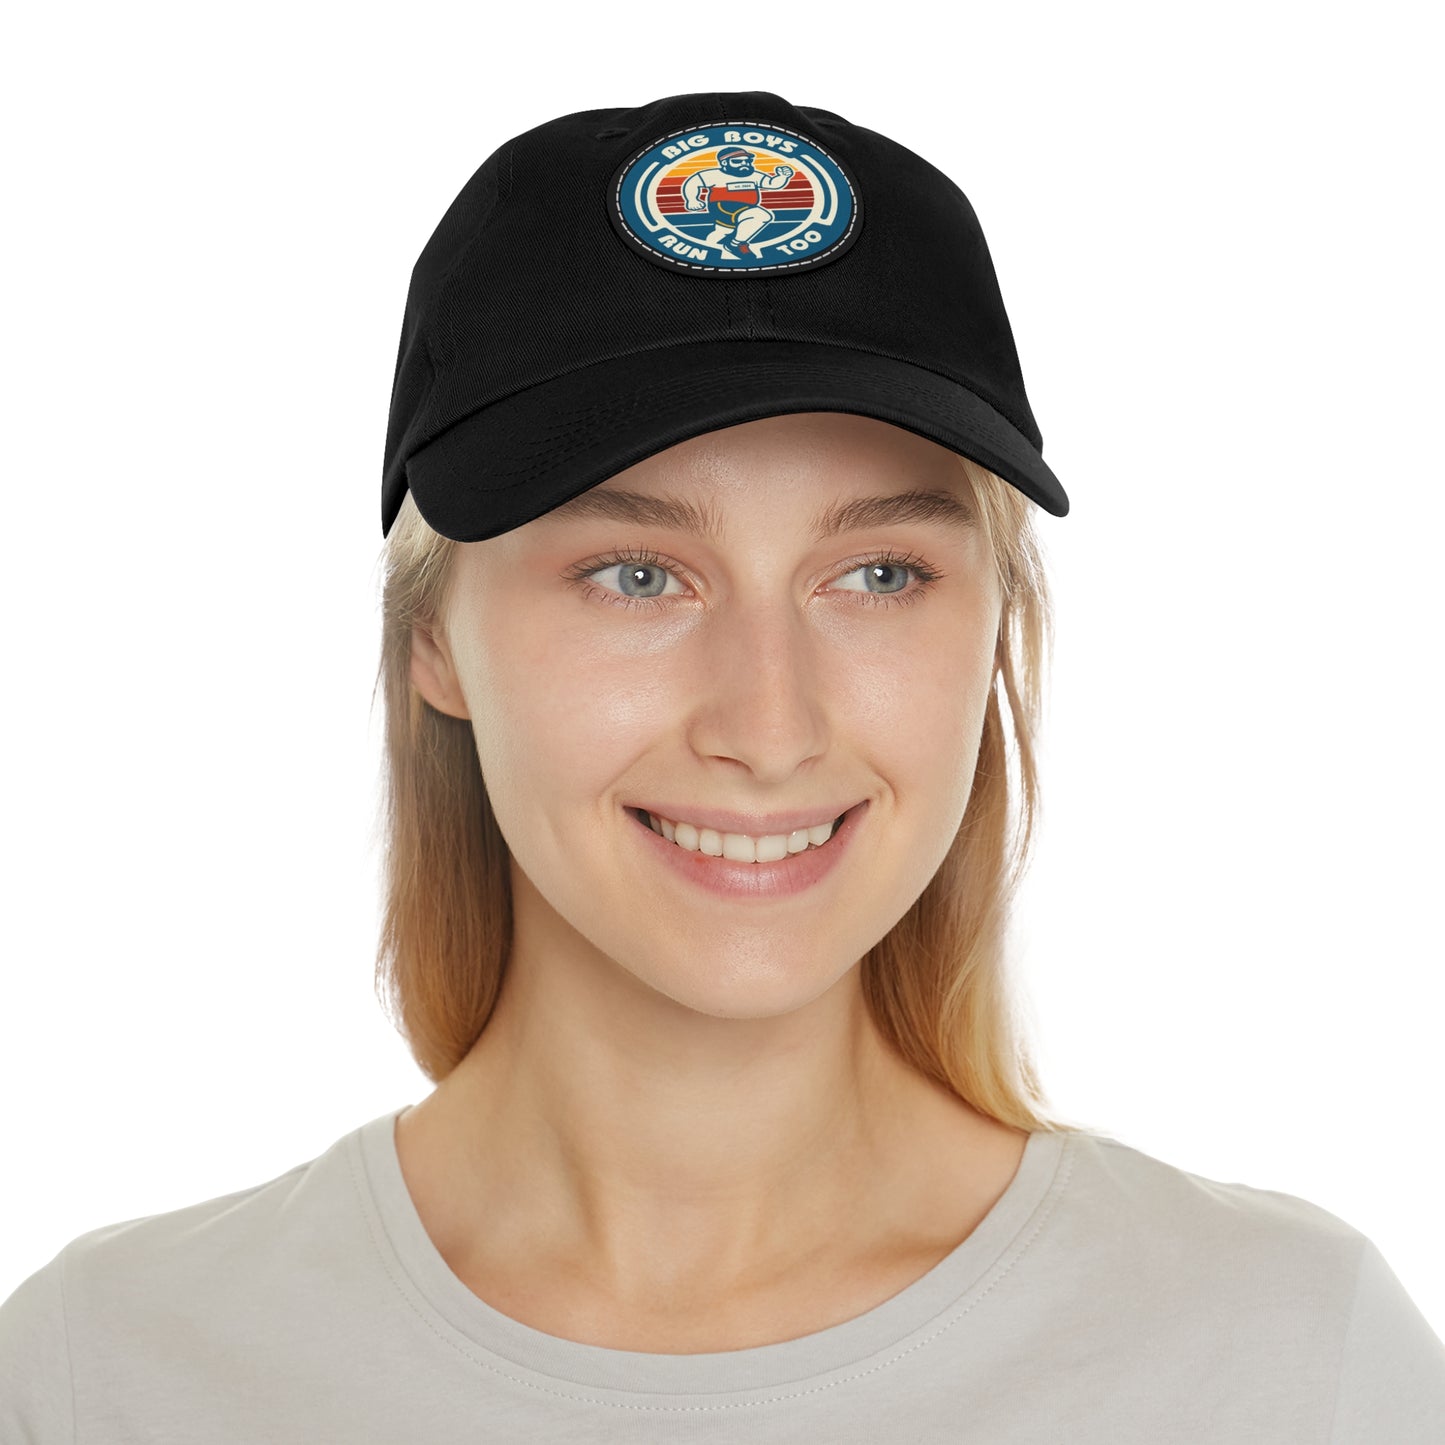 Big Boys Run Too Hat with Leather Patch (Round) (Adjustable Strap)